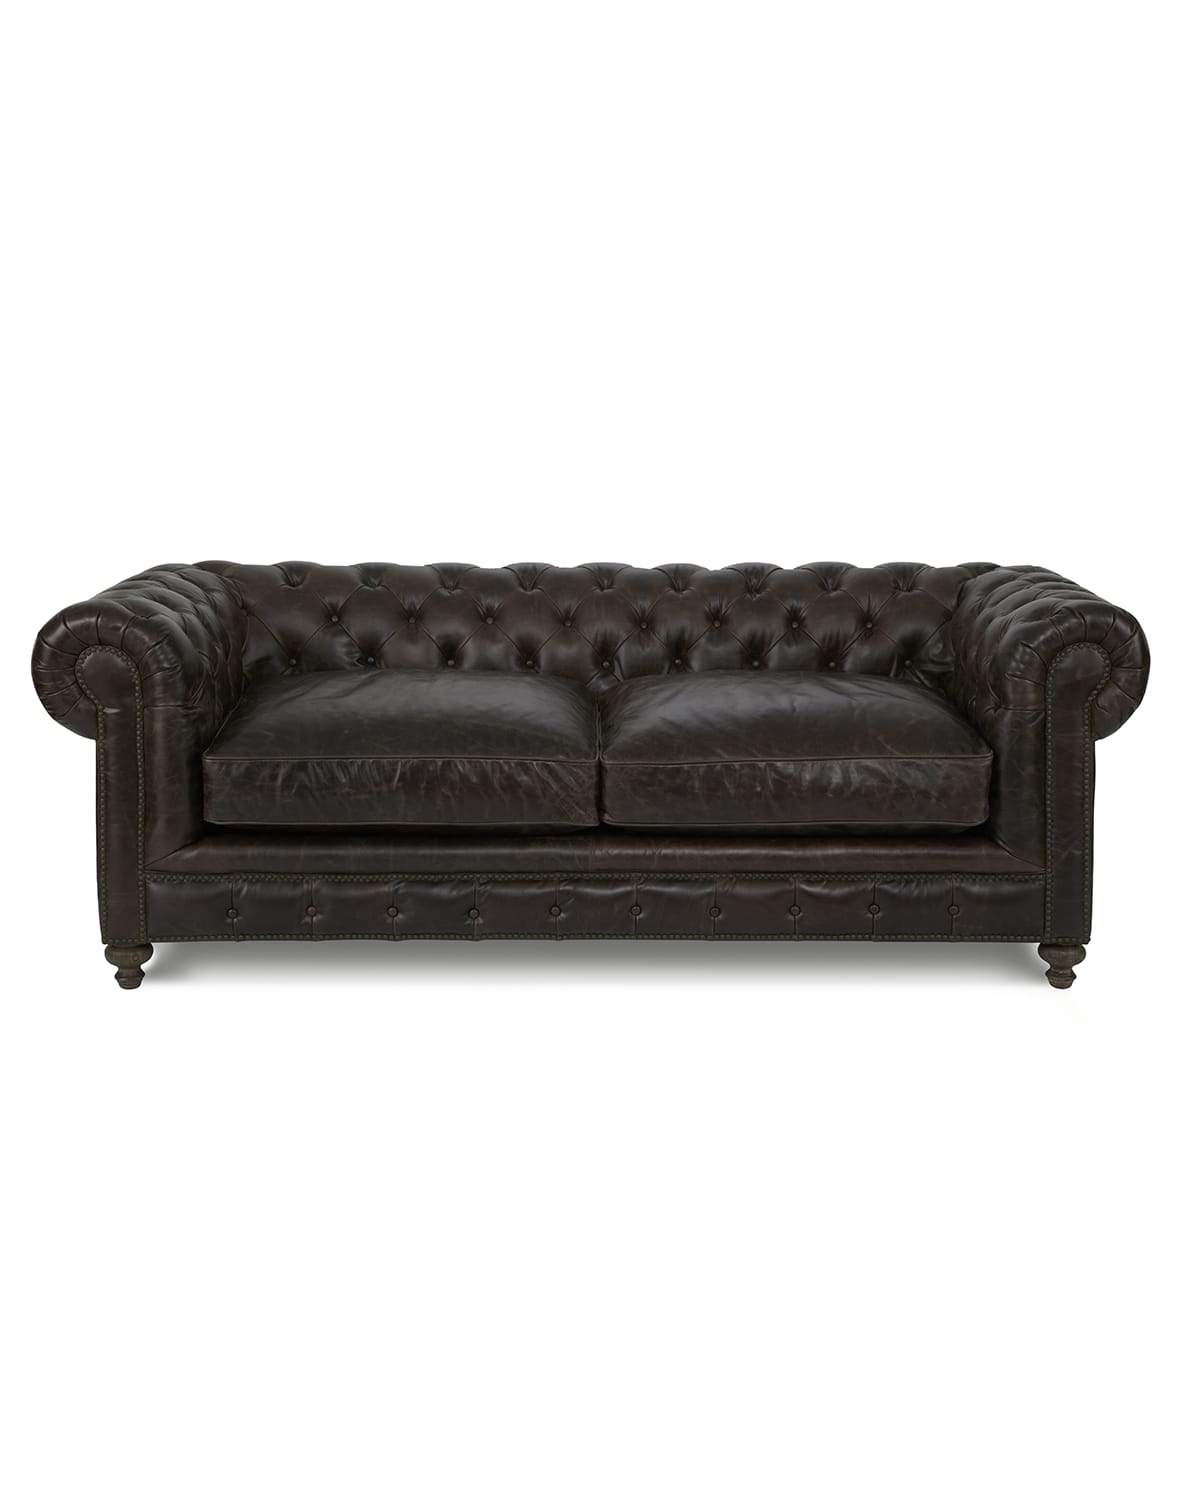 Image Warner Leather Collection 90" Chesterfield Sofa